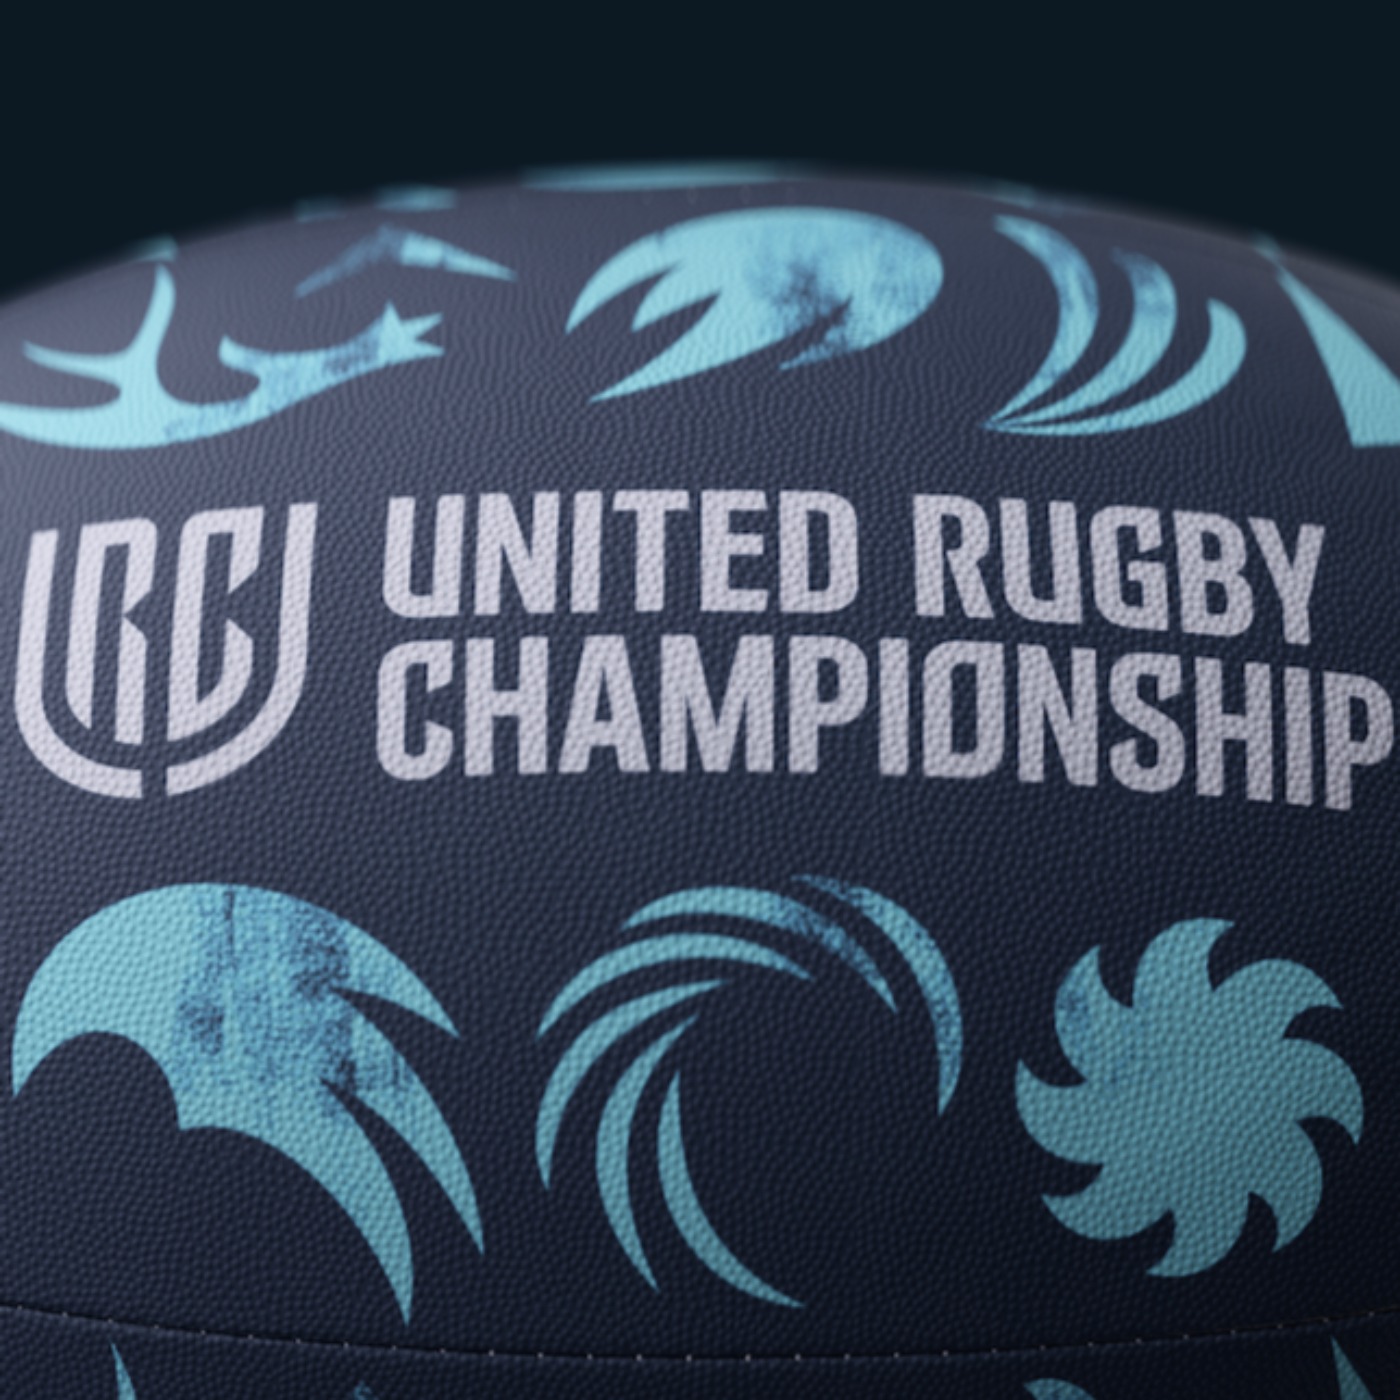 The United Rugby Championship - what does it mean for Connacht